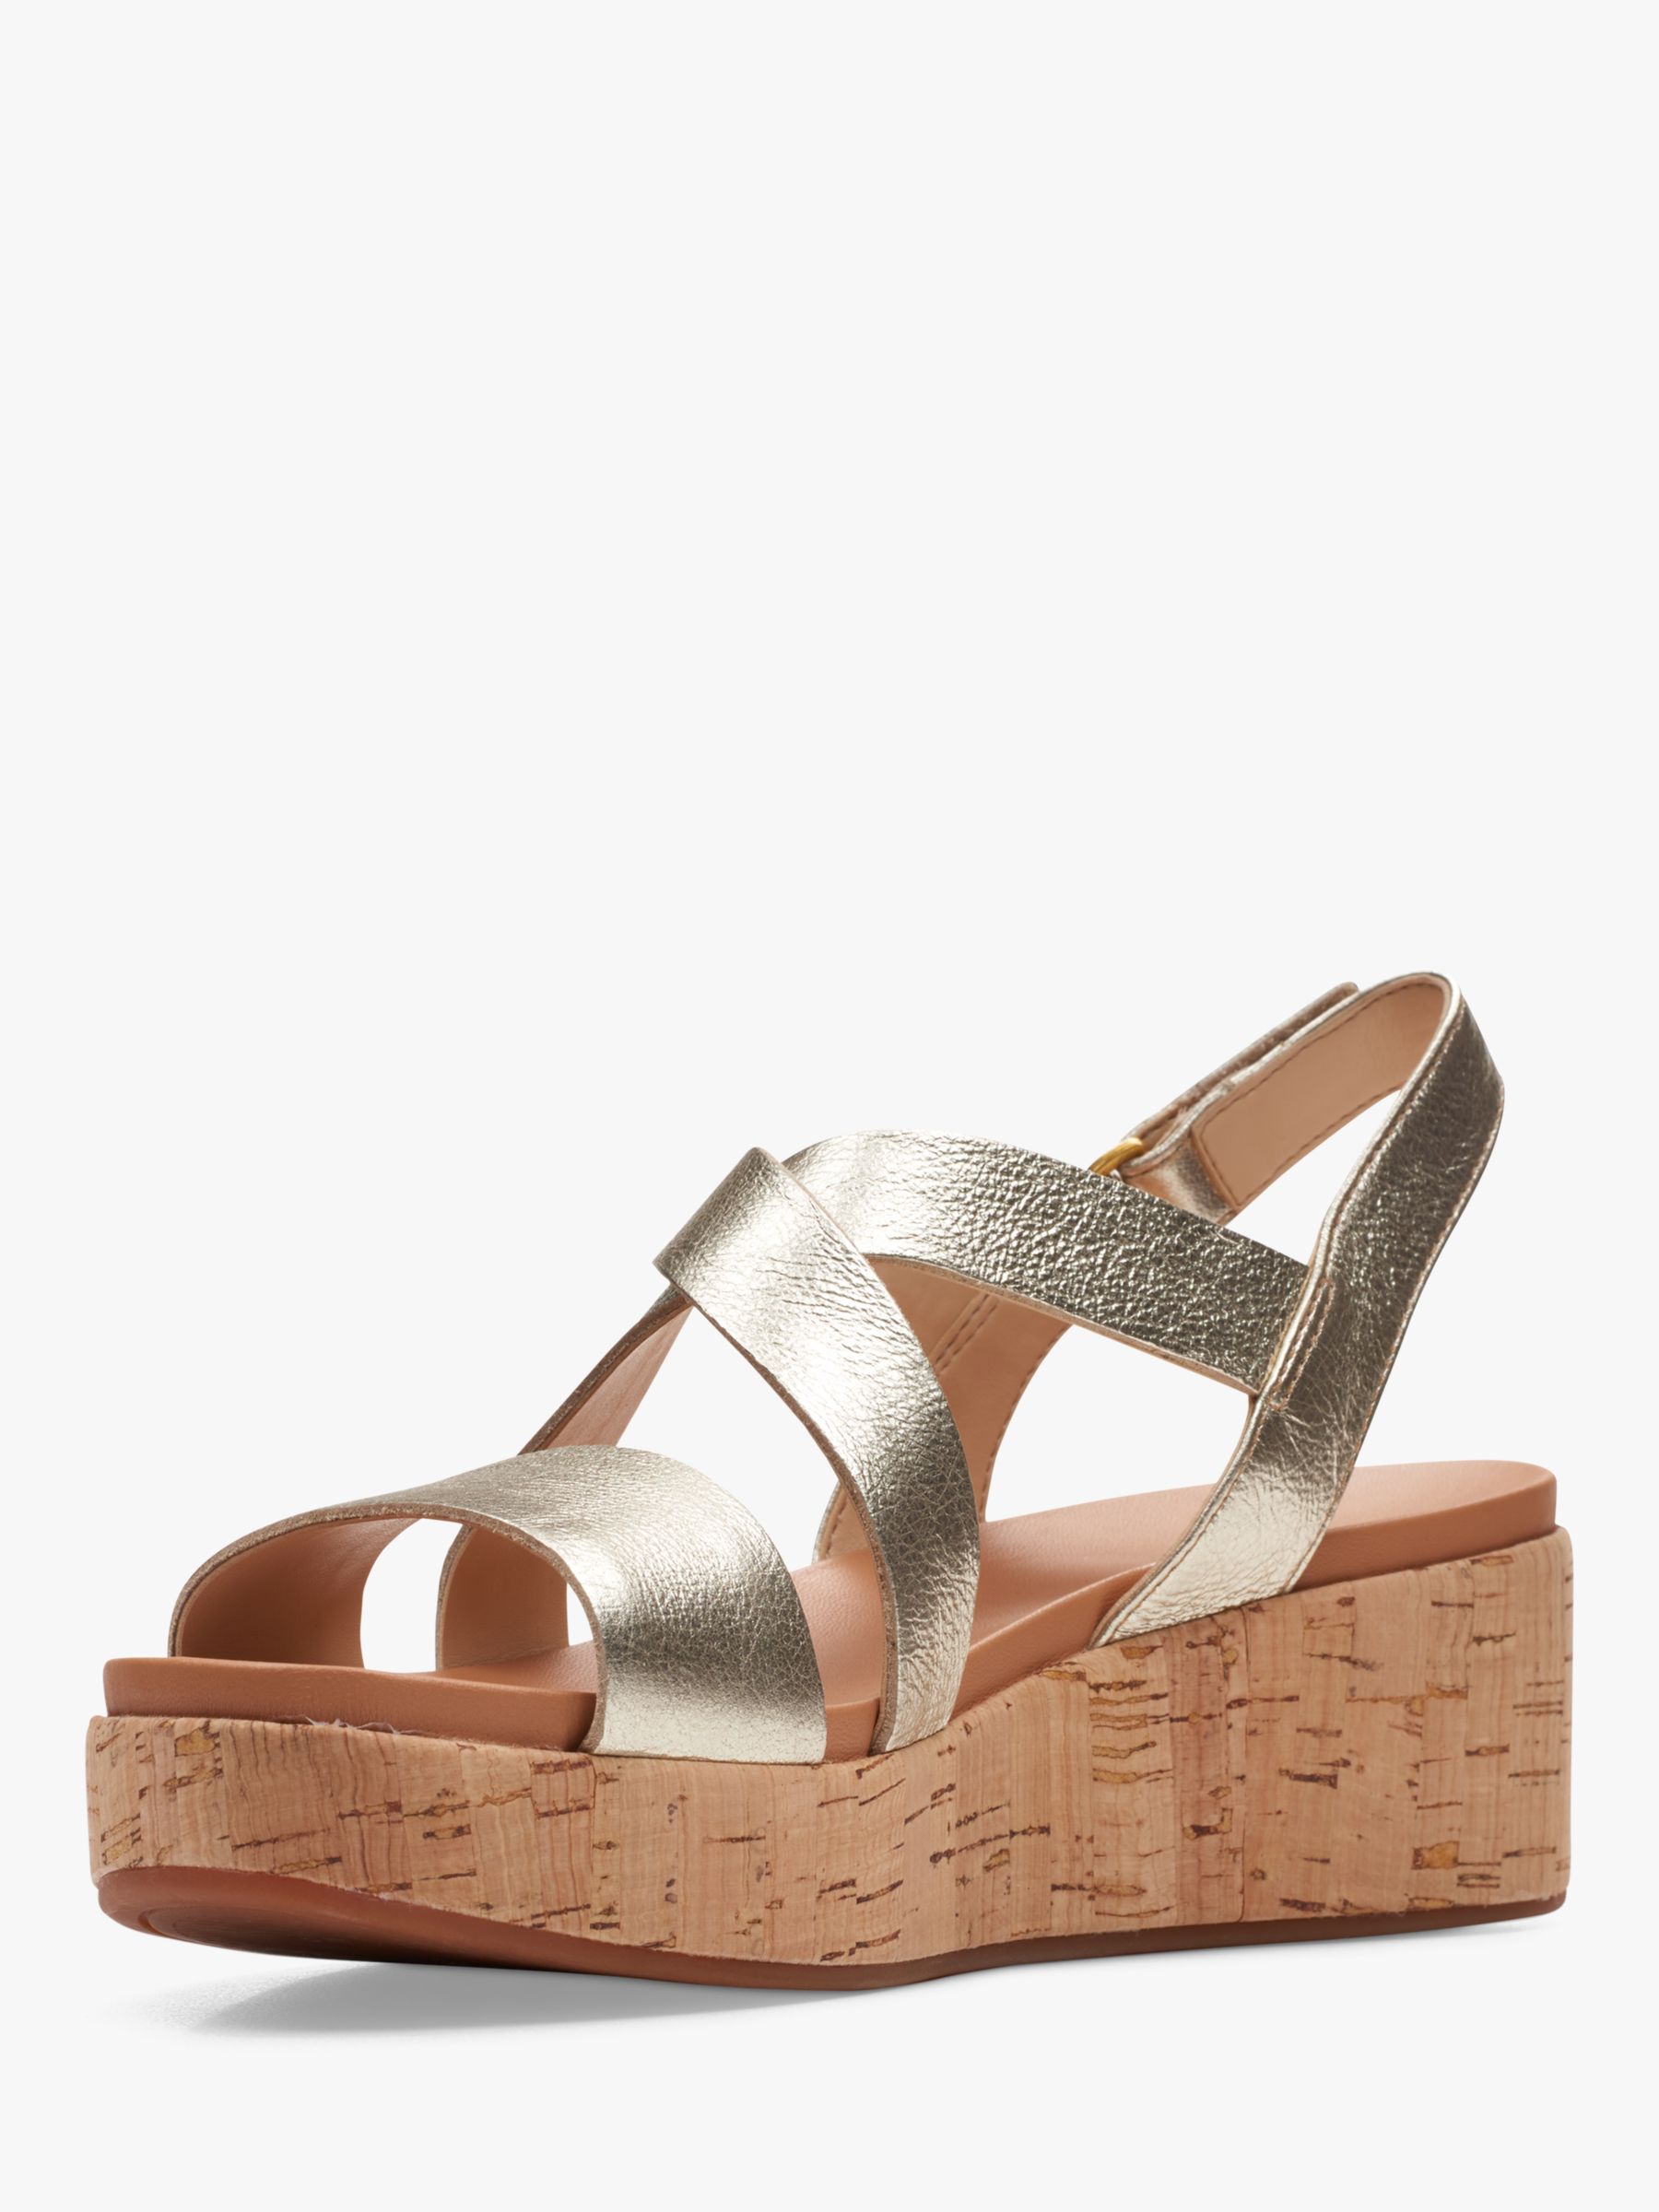 Clarks Kimmei Cork Wide Fit Leather Wedge Sandals, Champagne at John ...